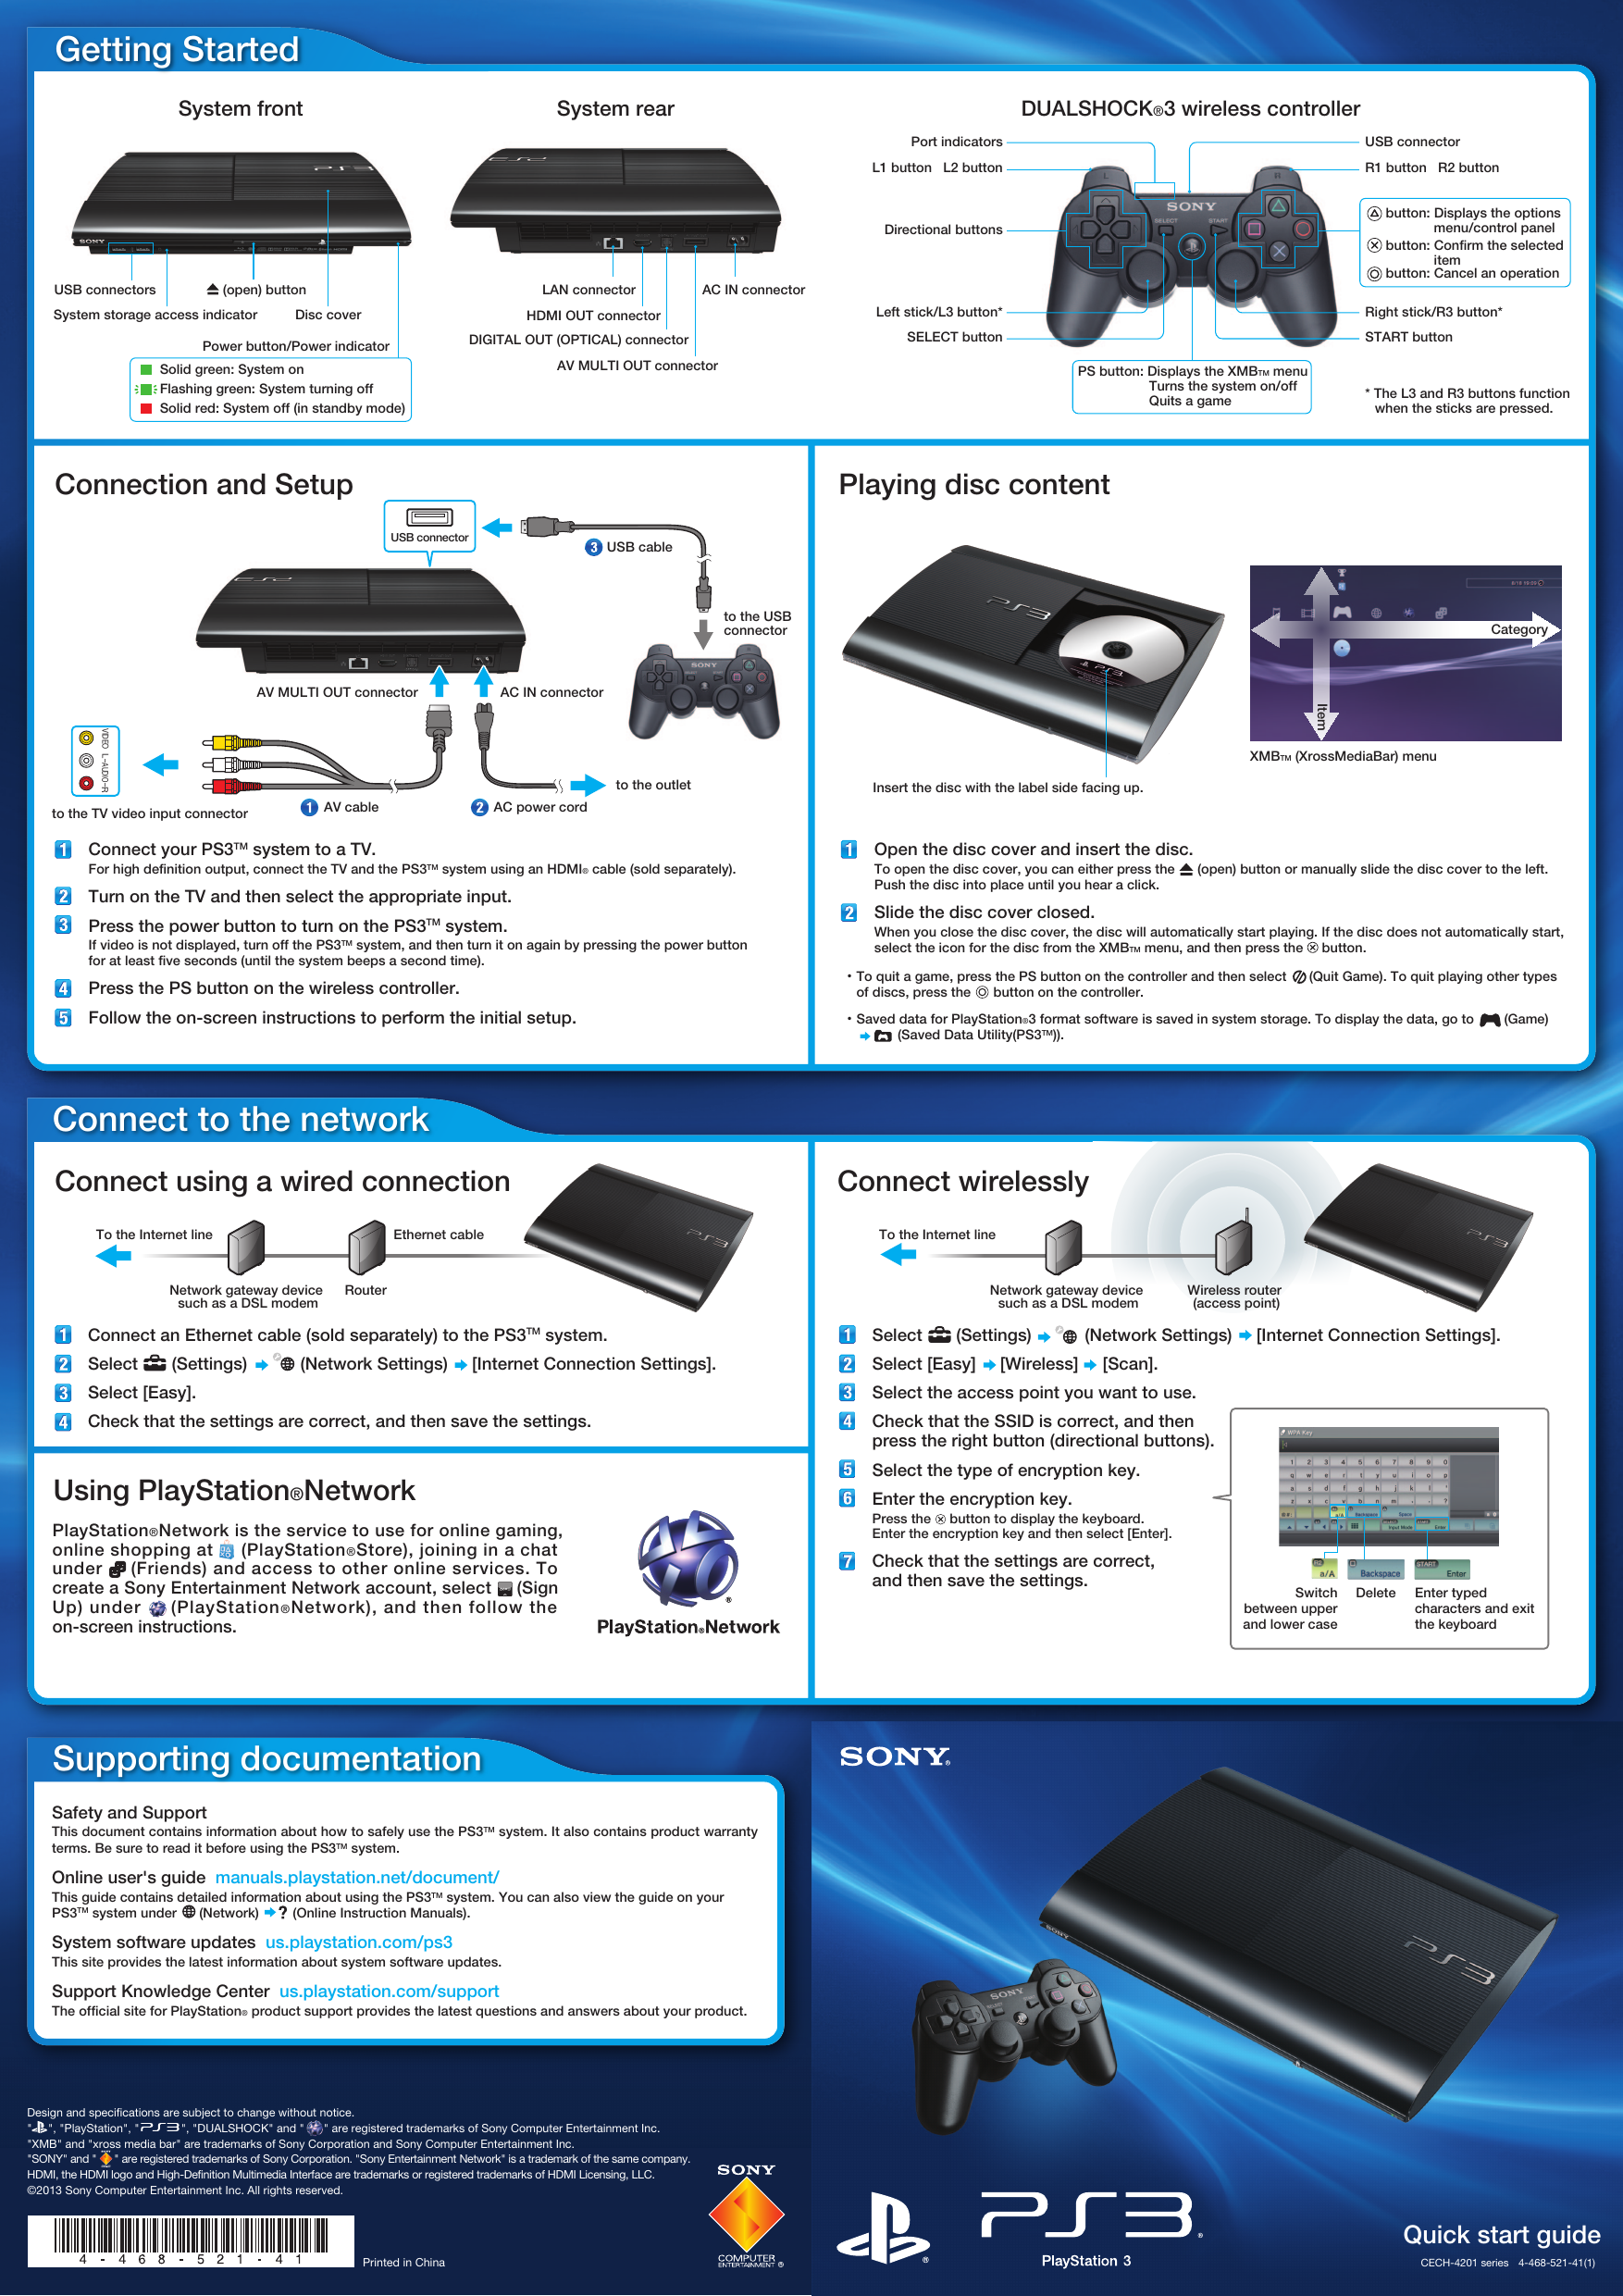 Page 1 of 2 - Sony CECH-4201 Series PS3 - CECH-4201A Getting Started 4201B 4201C-QSG